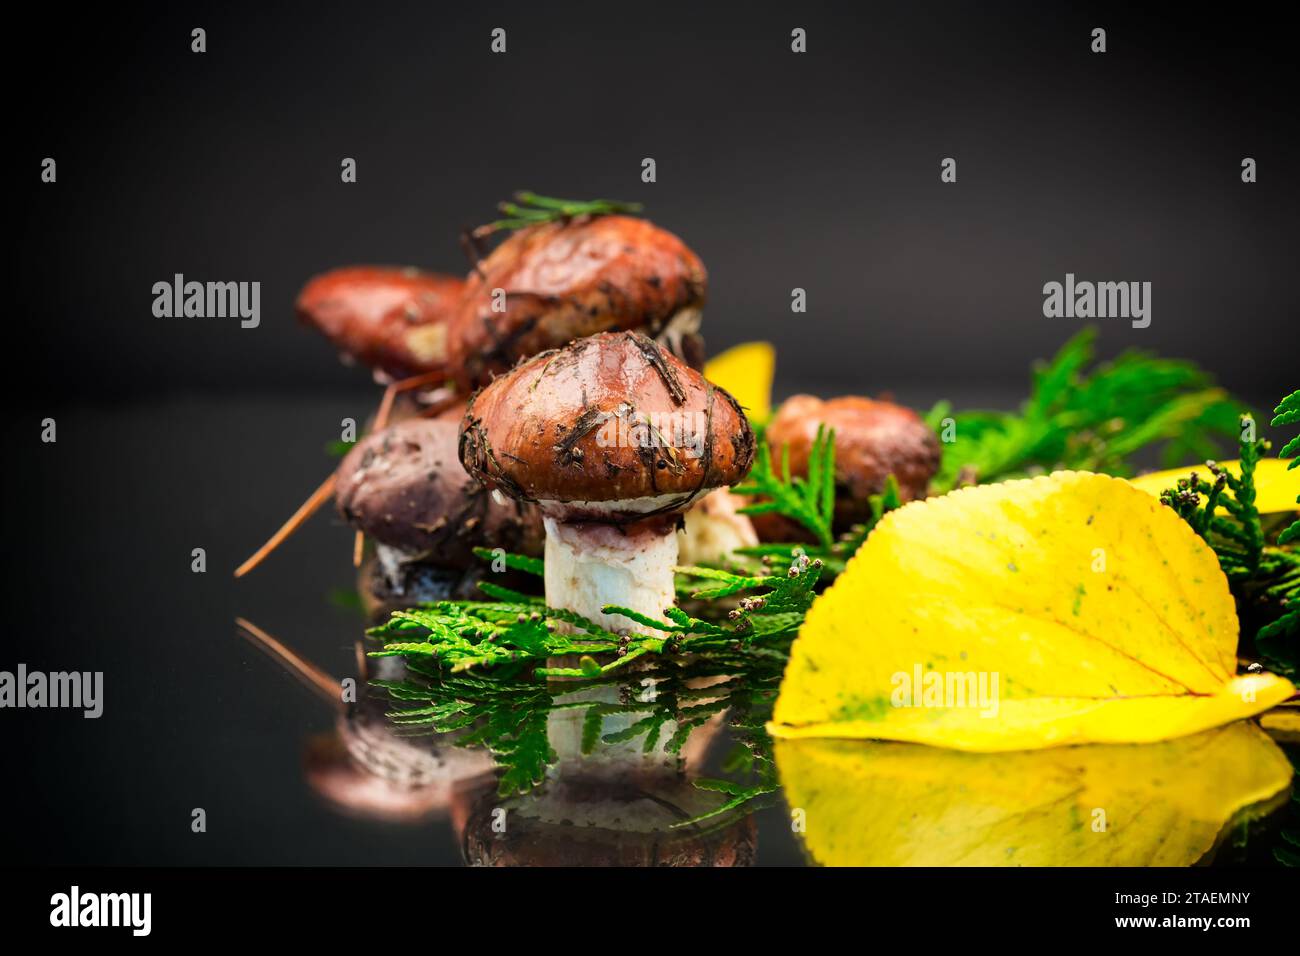 forest mushrooms with leaves, branches and fir trees isolated on black background Stock Photo